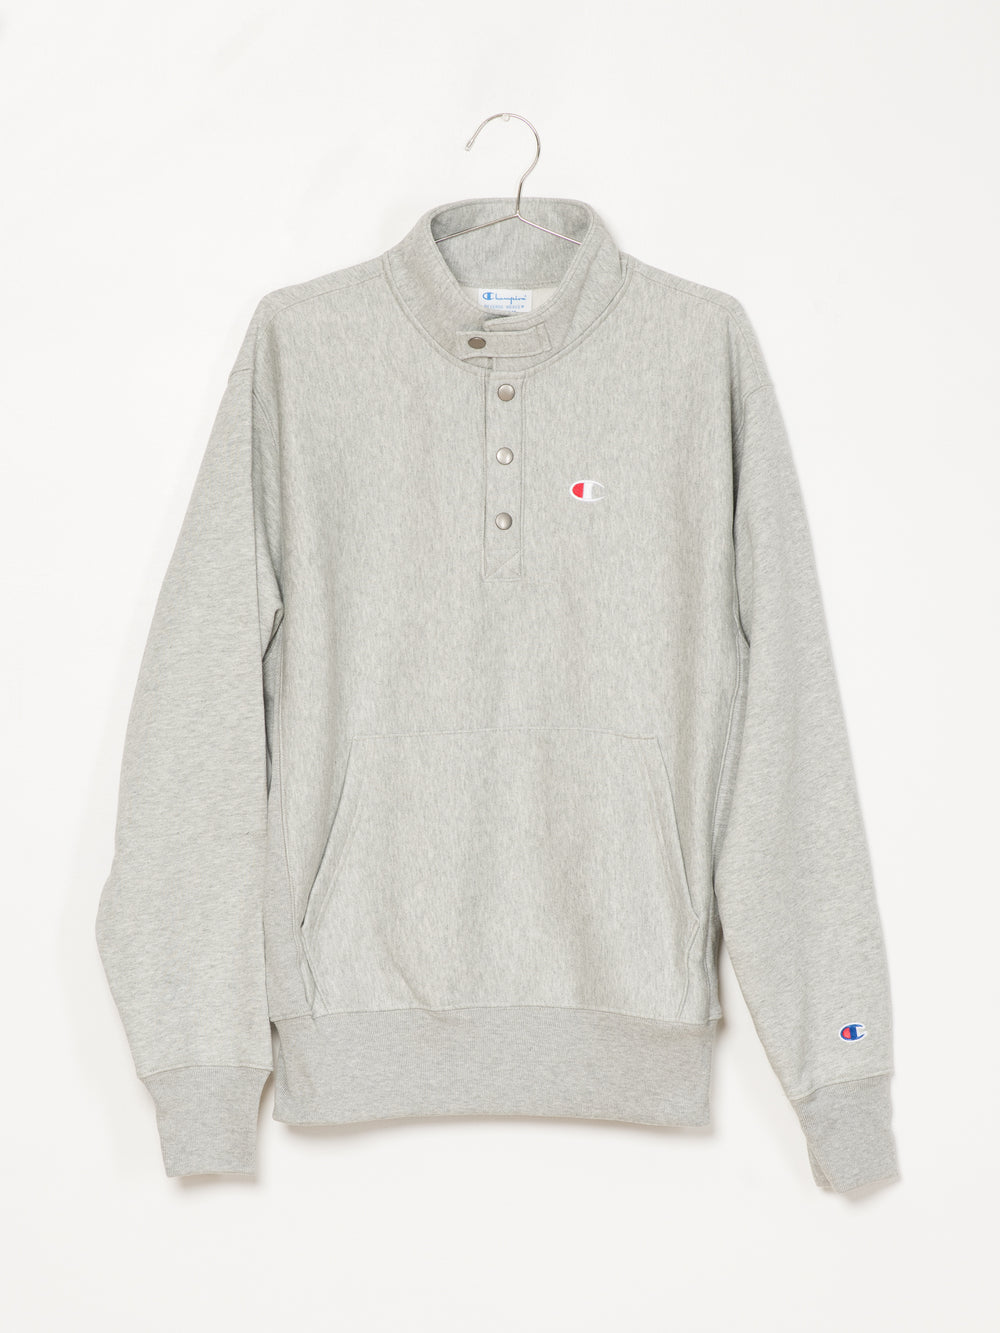 CHAMPION REVERSE WEAVE 1/4 SNAP PULLOVER CREW  - CLEARANCE